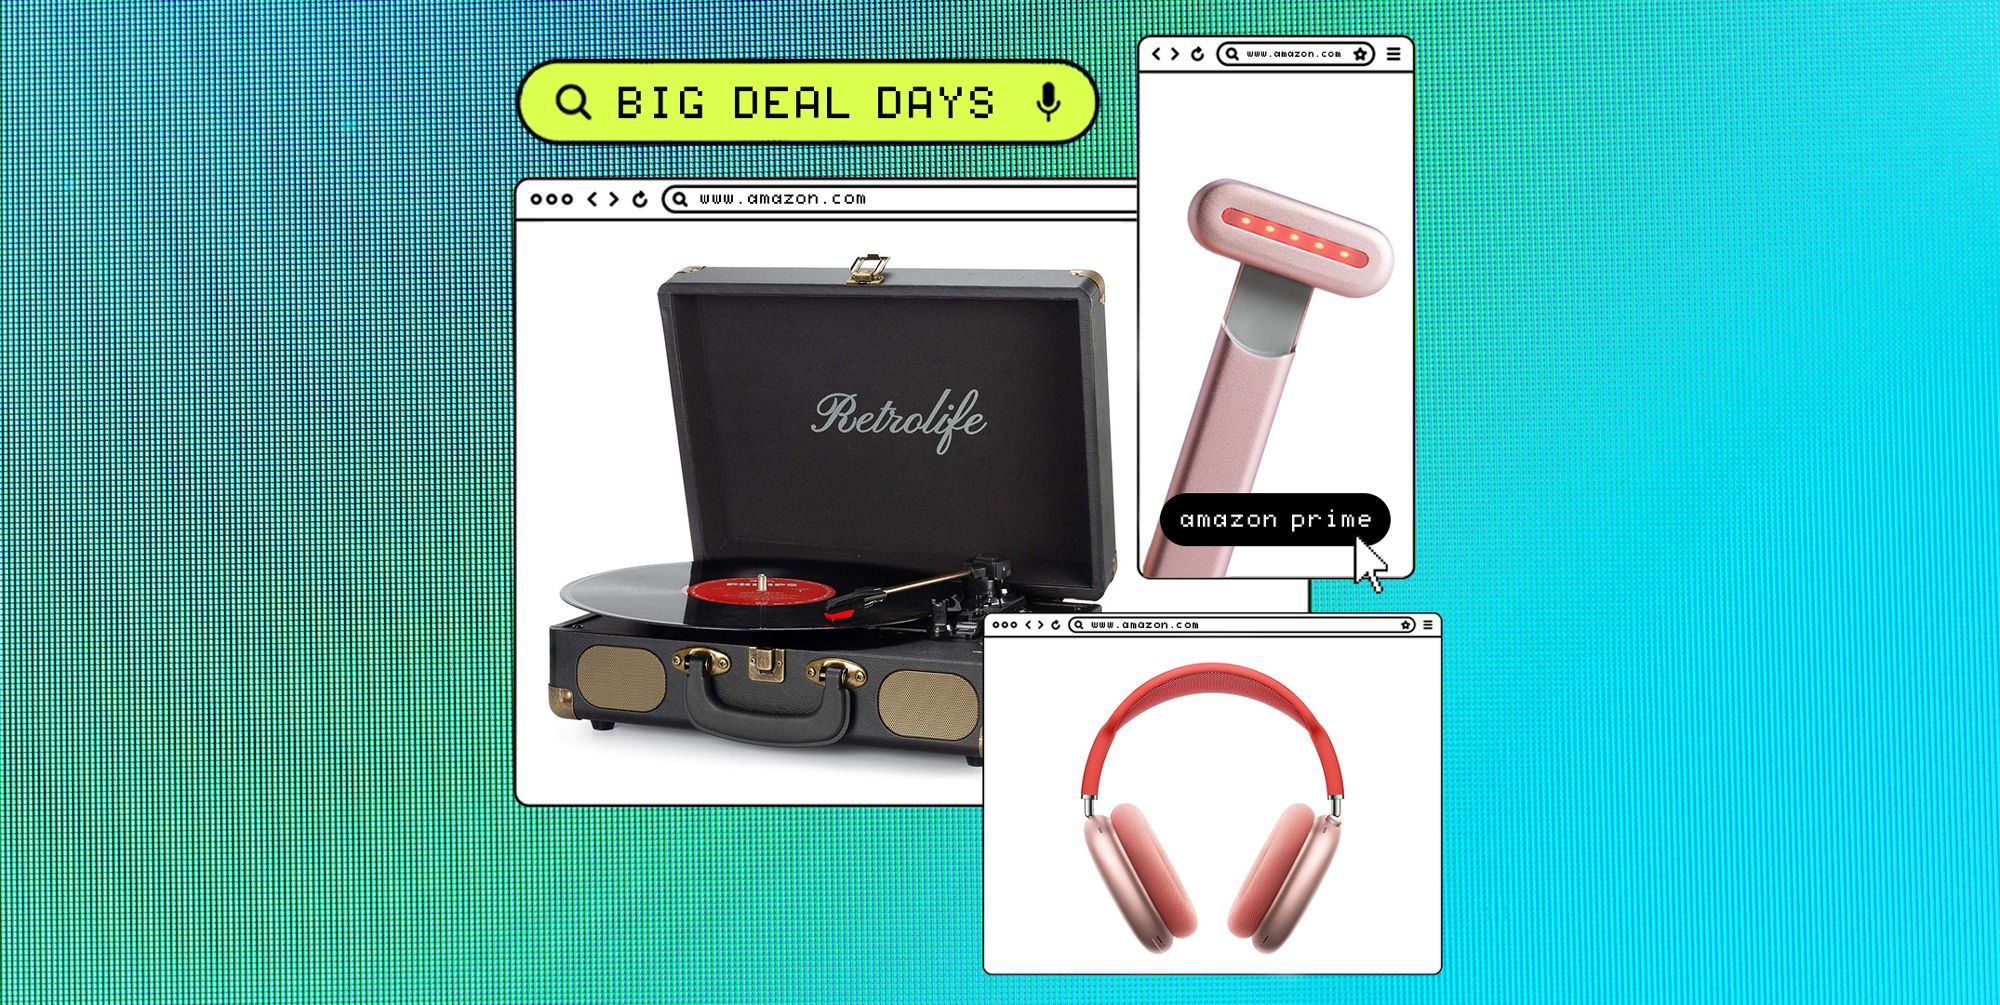 13 viral TikTok home Prime Day deals to shop from  2023